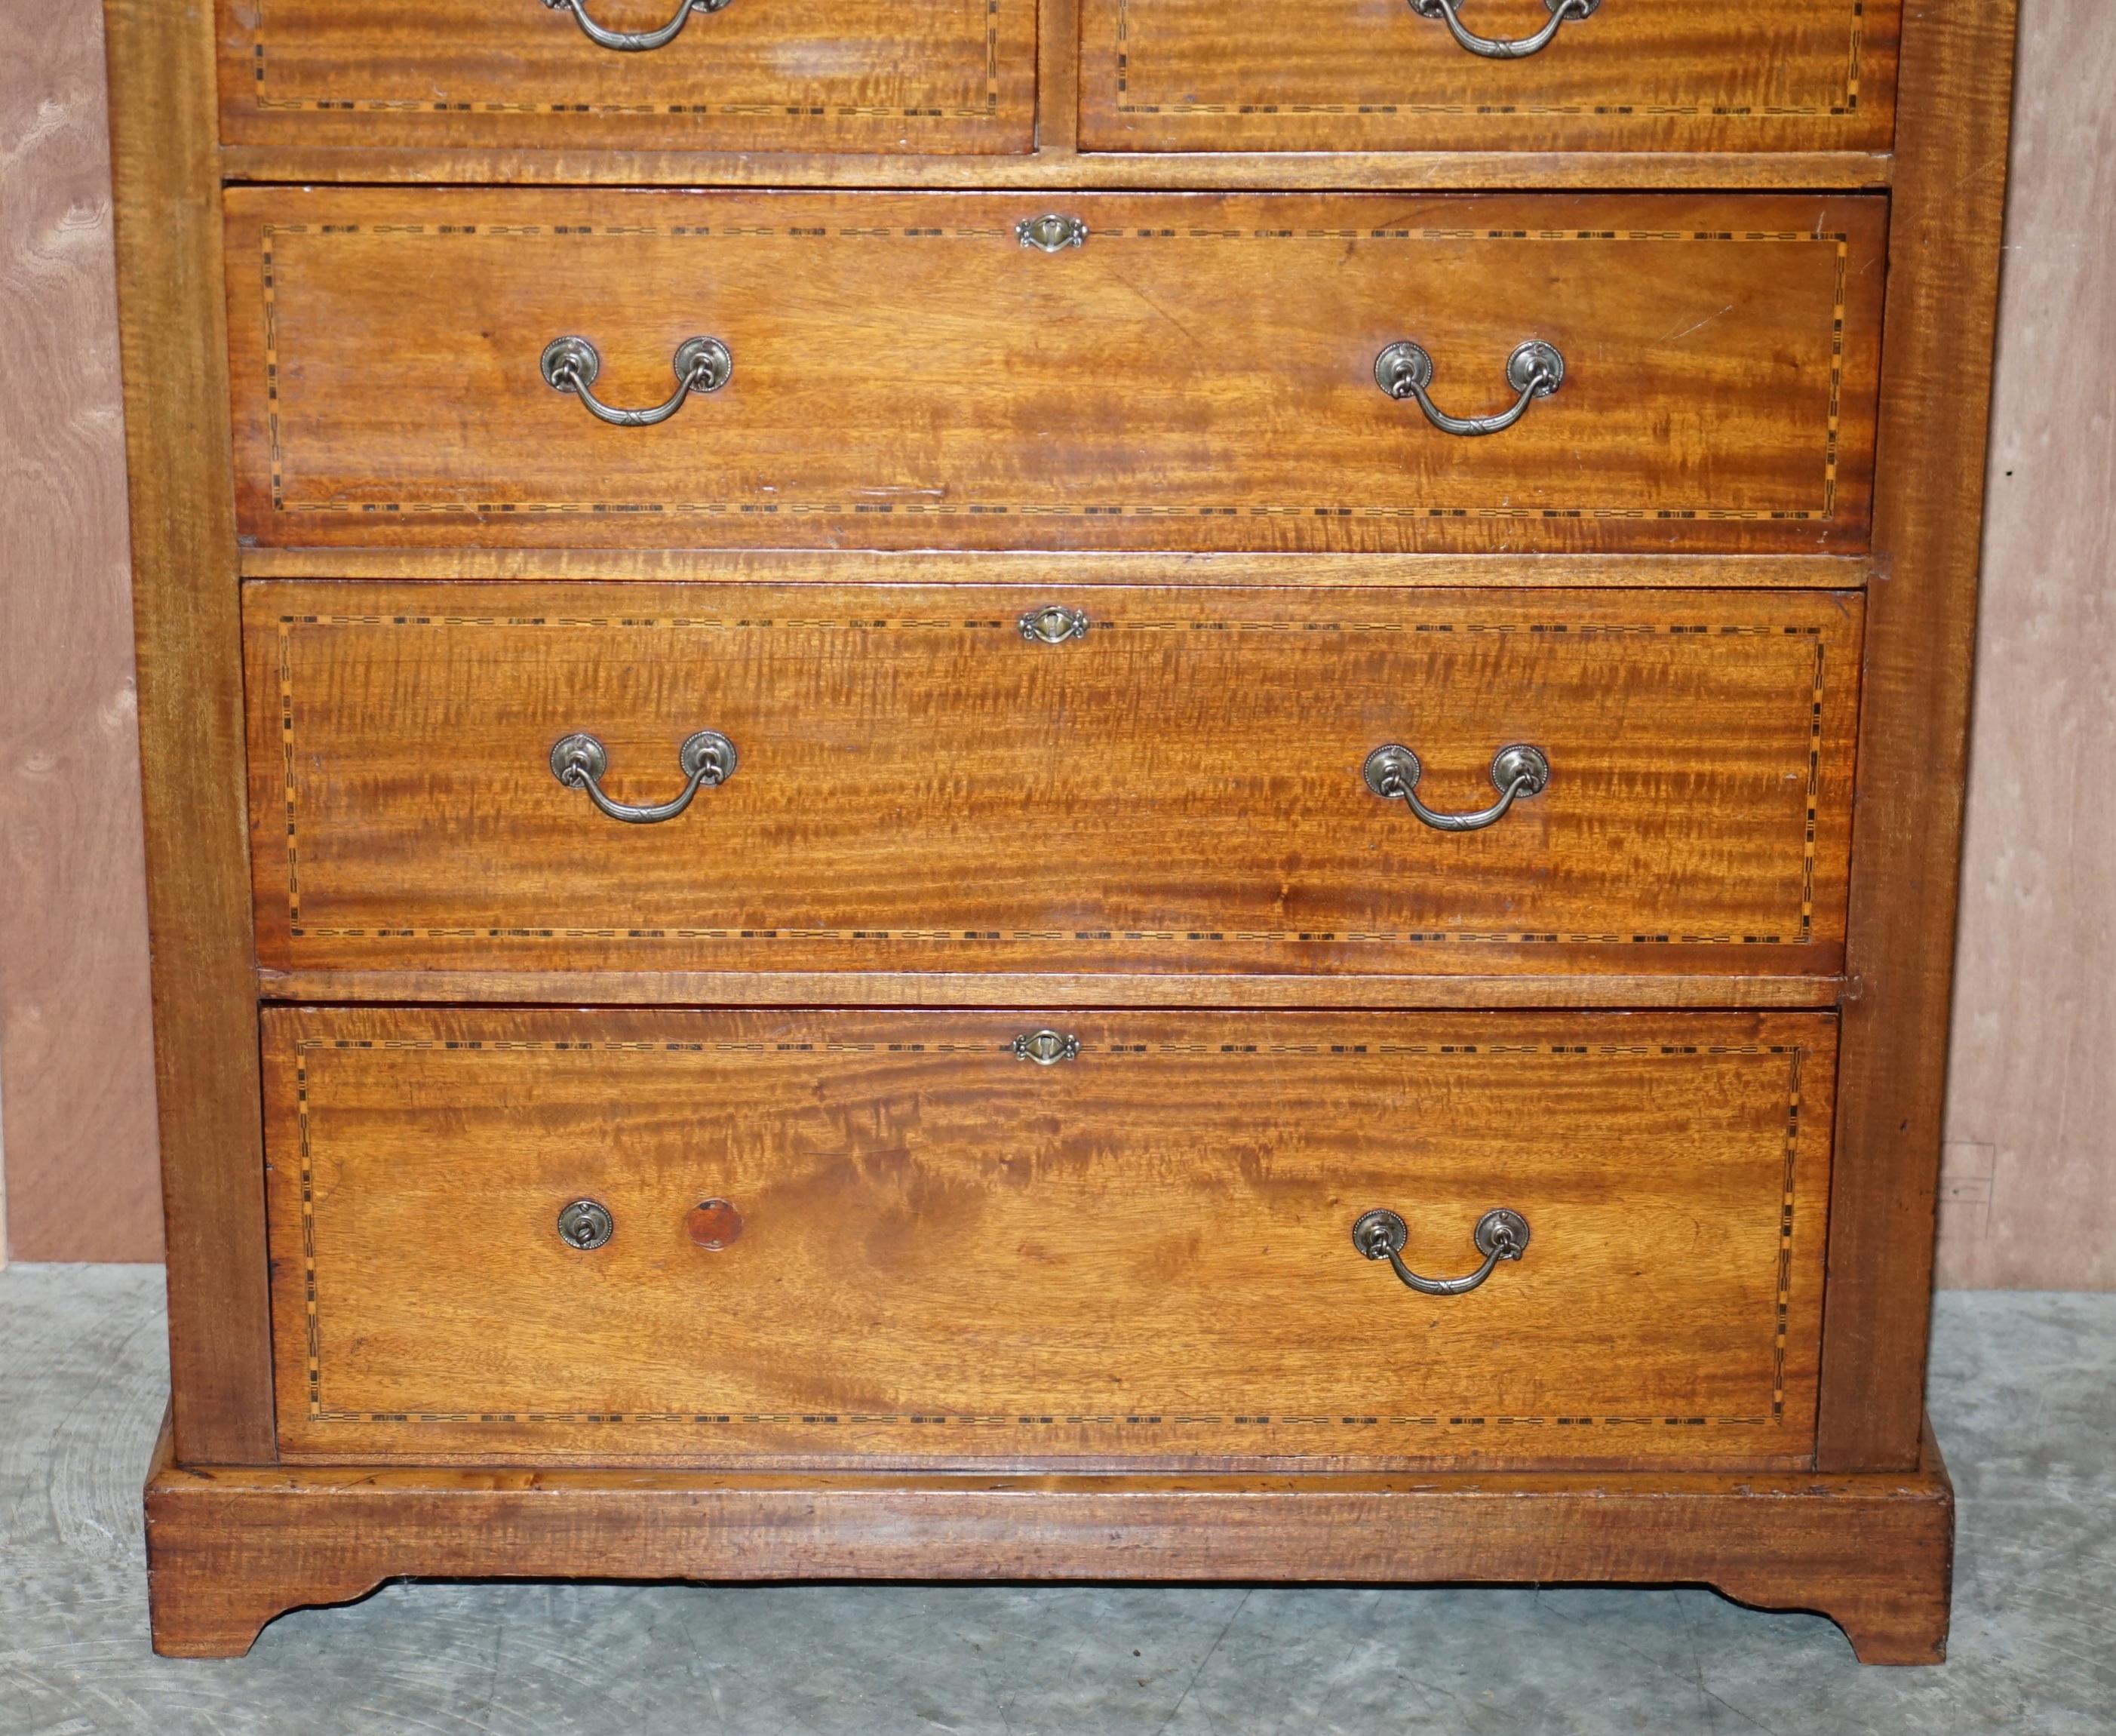 Hand-Crafted Antique Sheraton Inlaid Victorian 1860 Chest of Drawers Satinwood & Hardwood